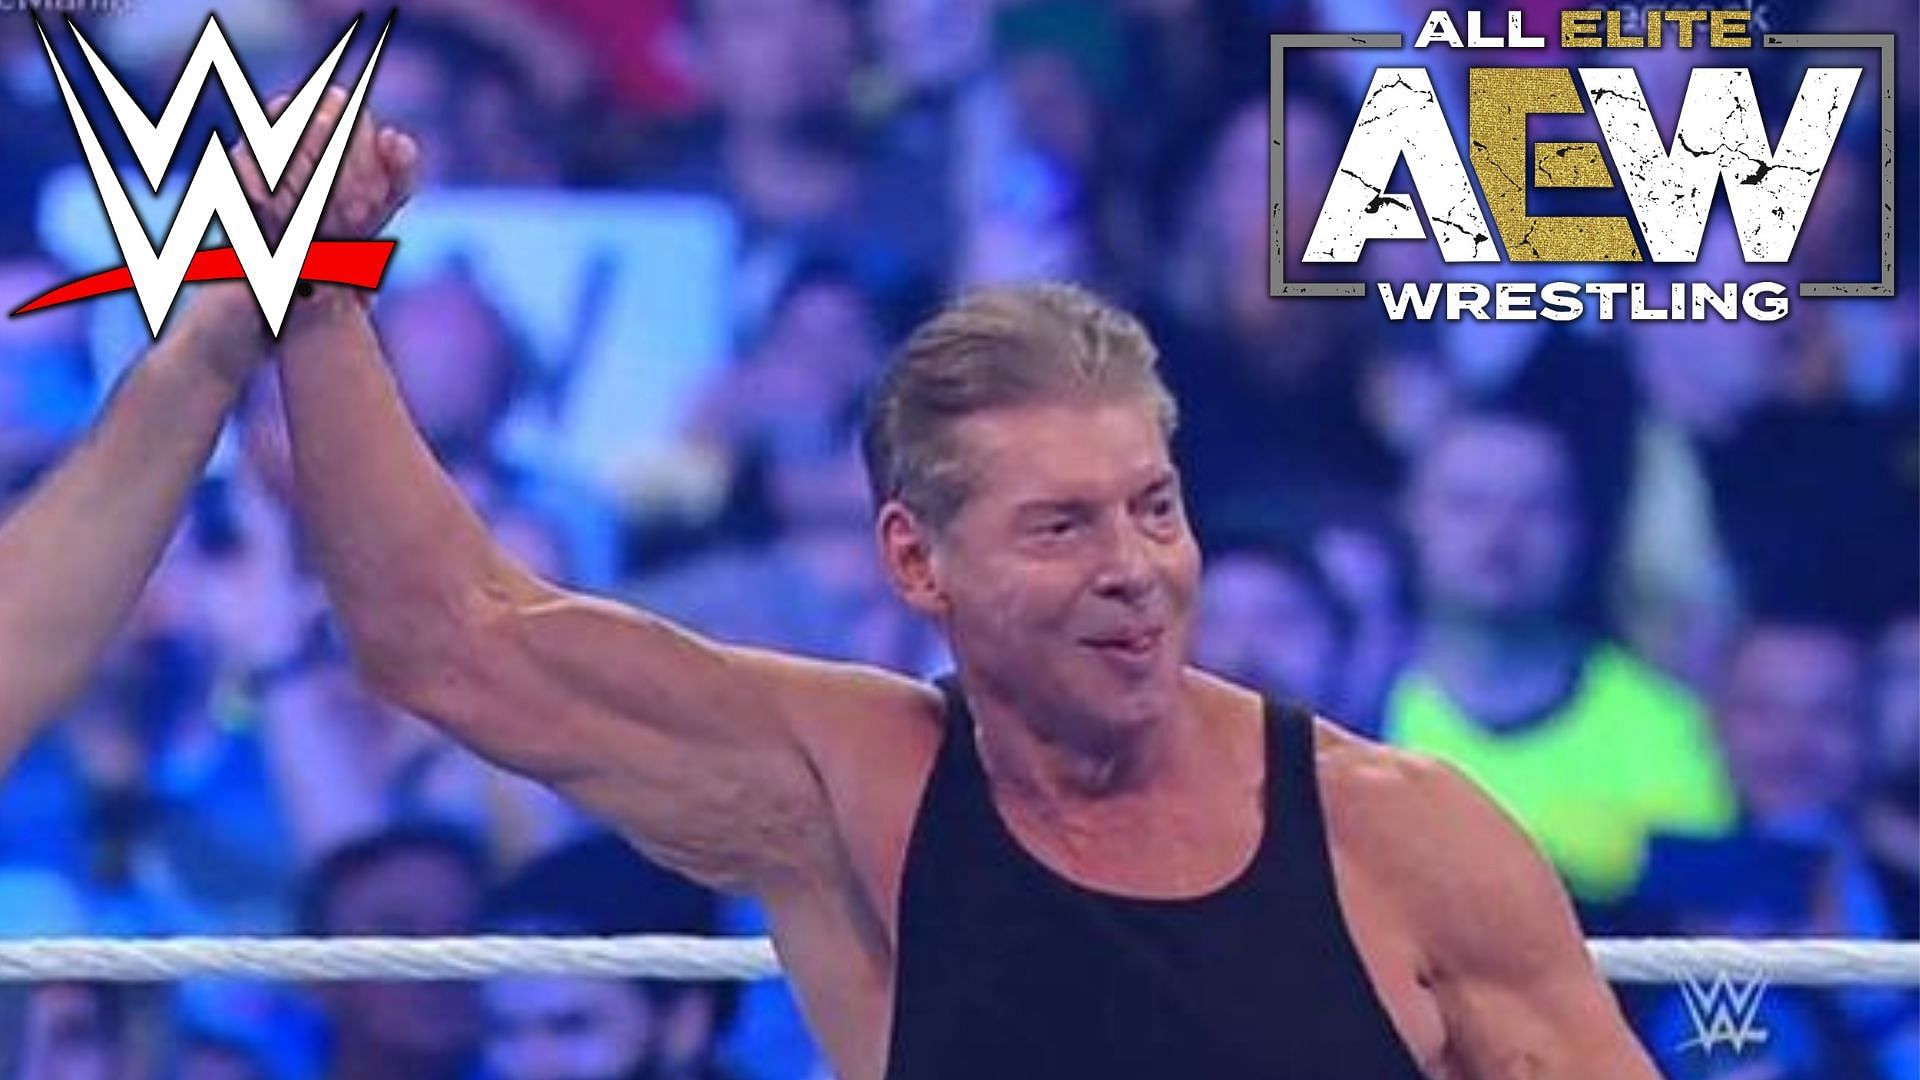 Vince McMahon has arguably influenced modern wrestling more than any other name in the industry.